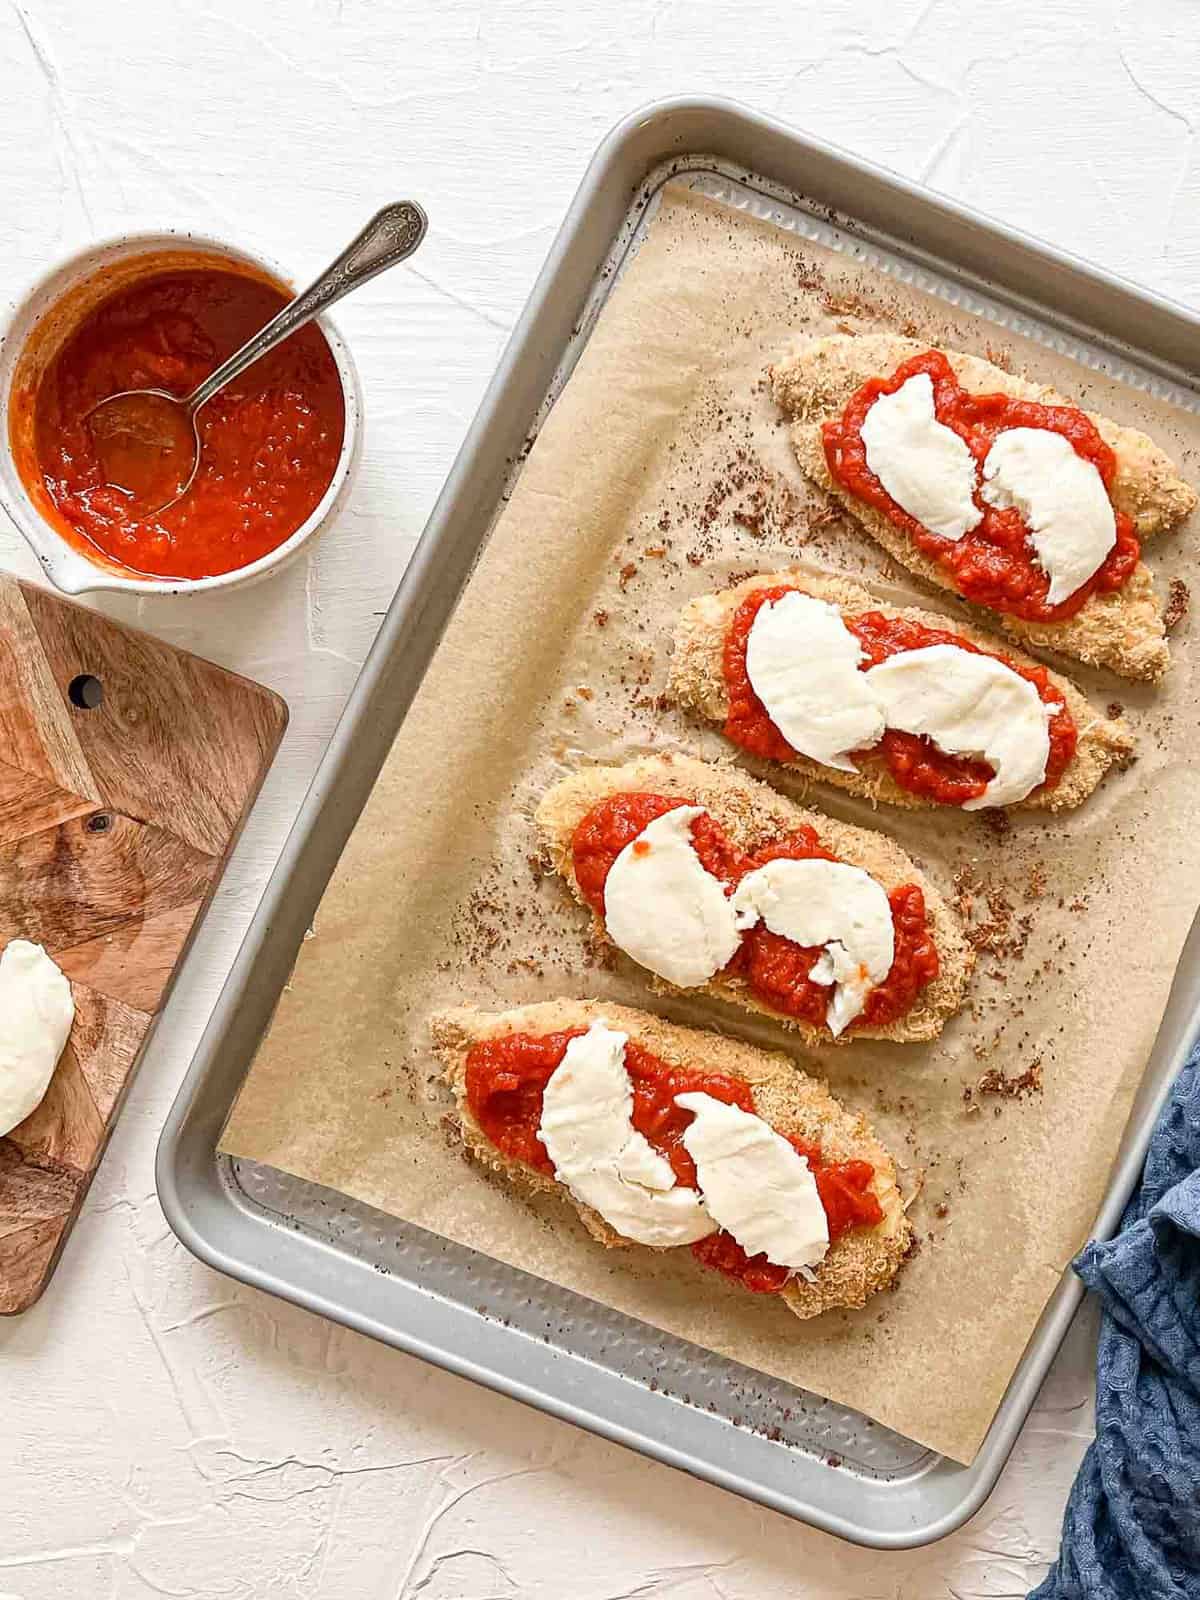 Breaded Chicken Breasts on baking sheet with marinara and fresh mozzarella for Baked Chicken Parmesan